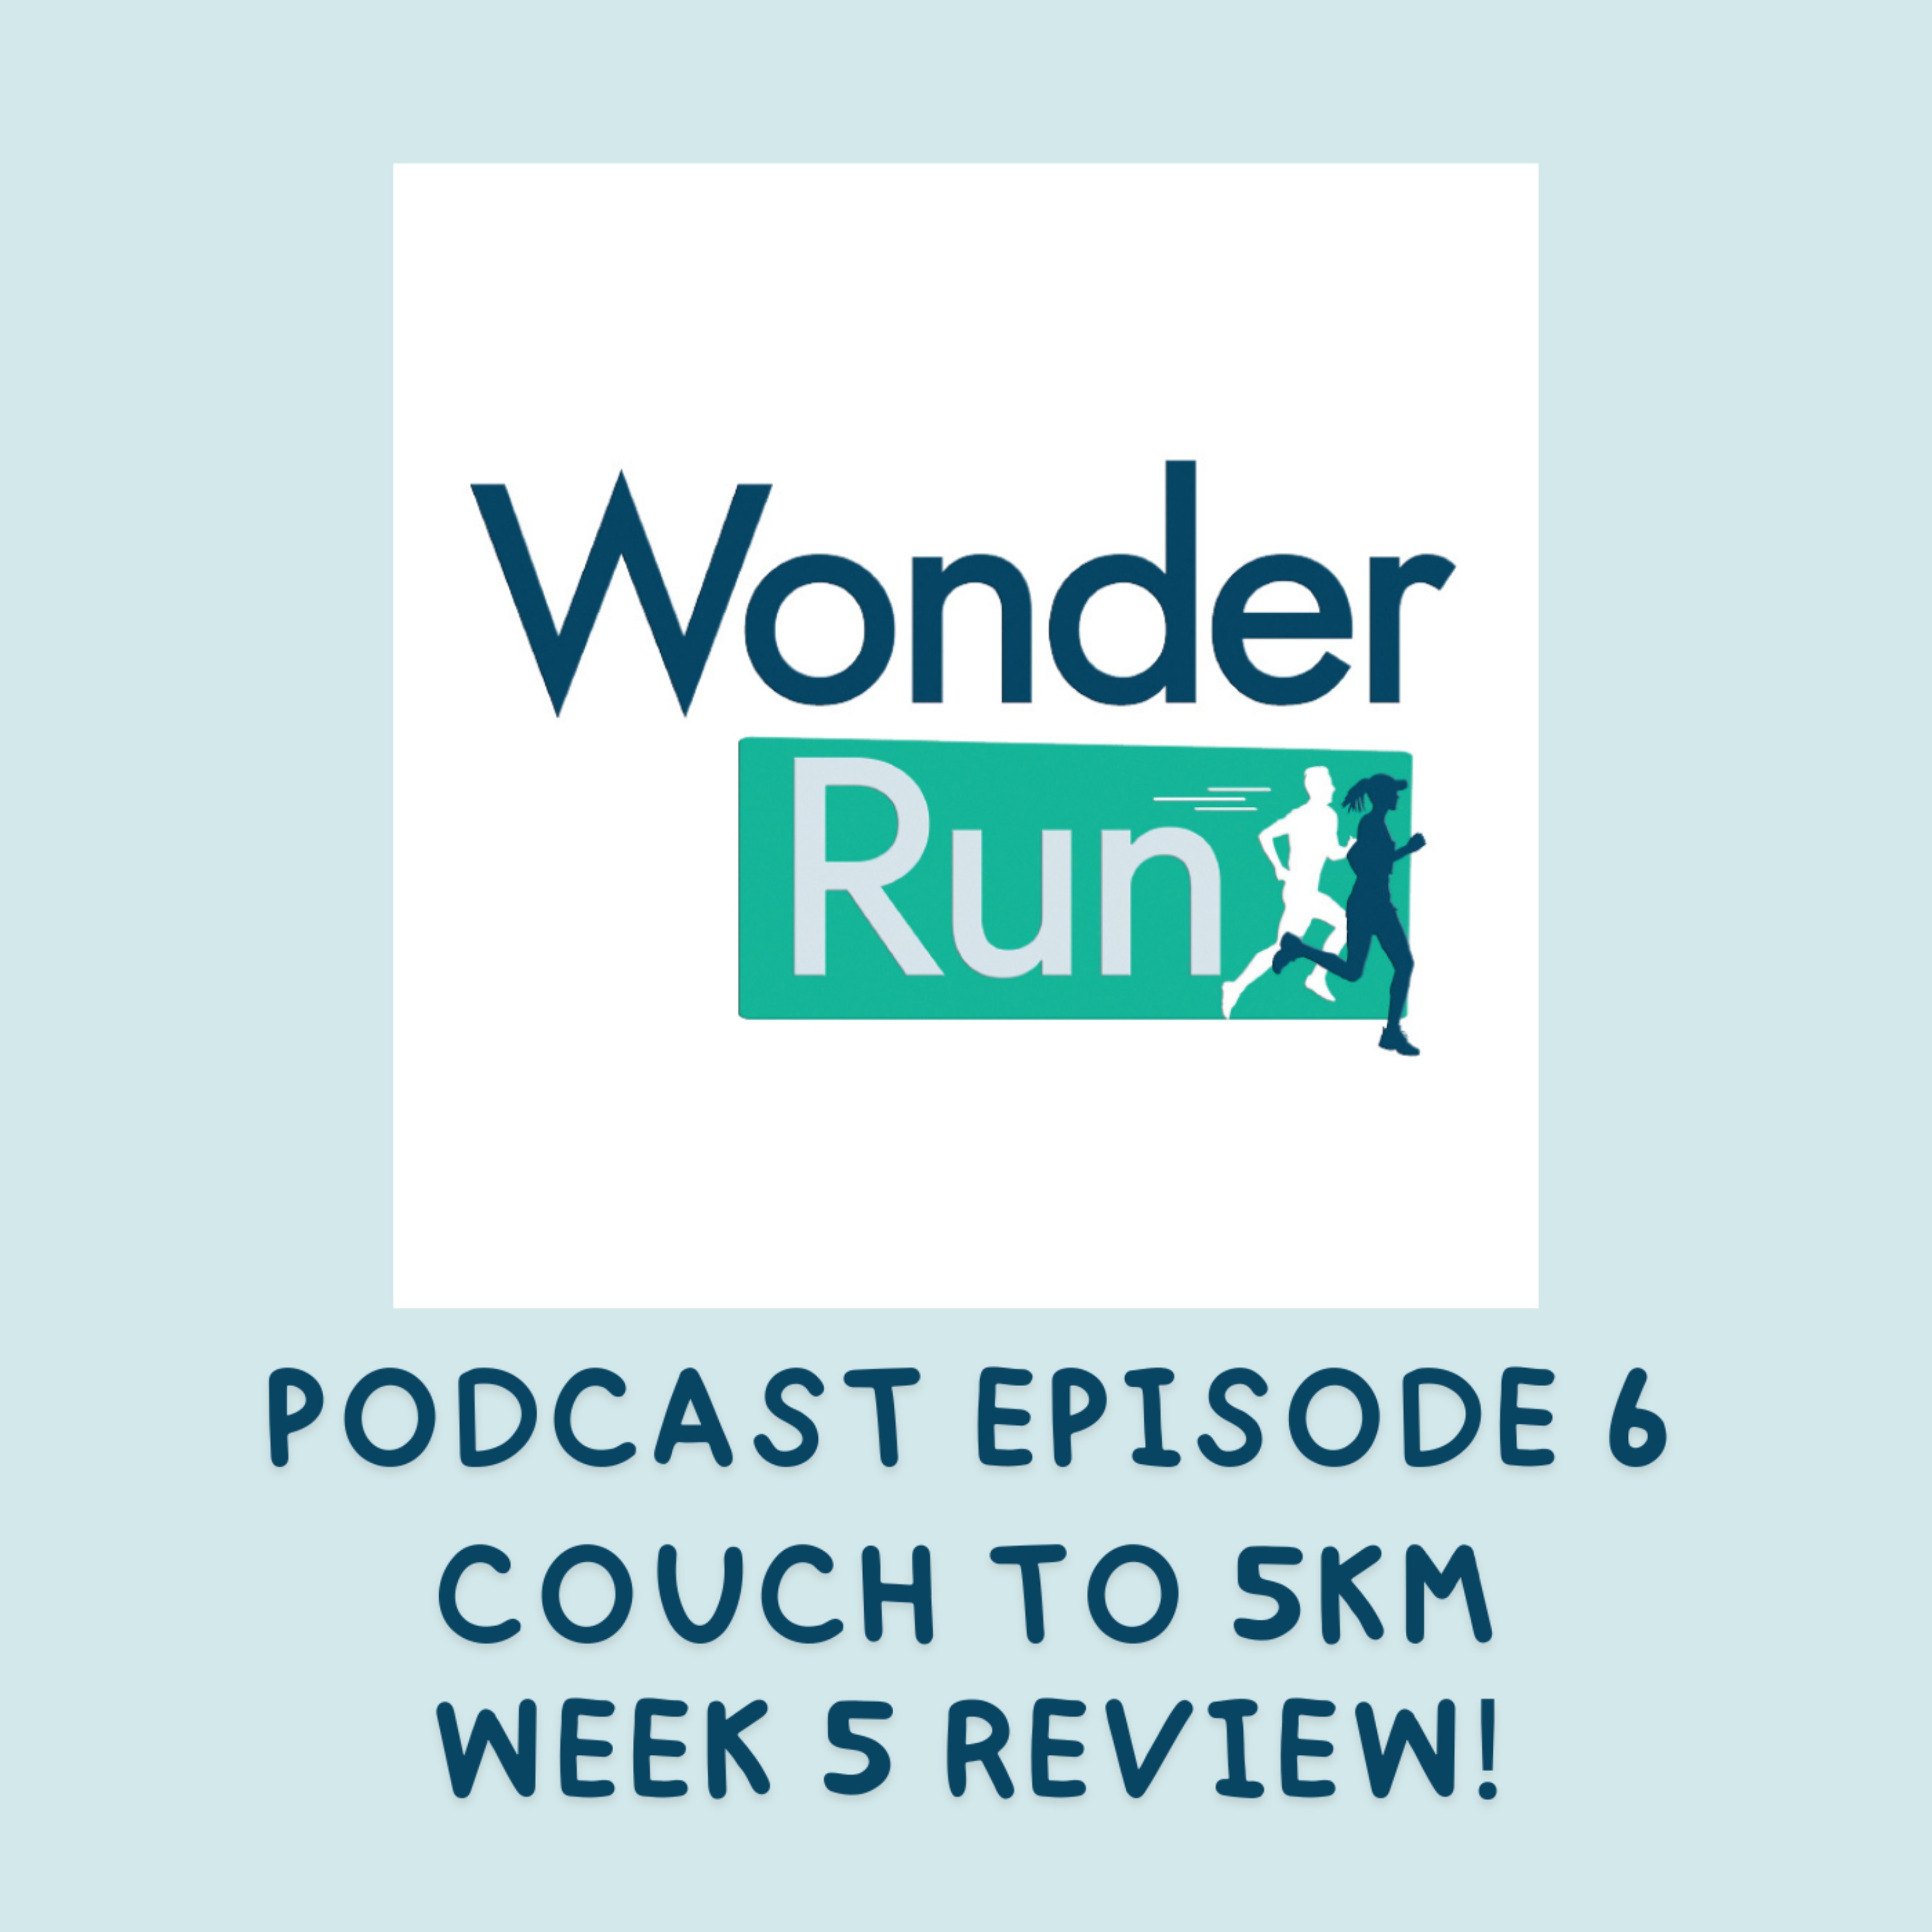 Couch to 5km - Week 5 Review!